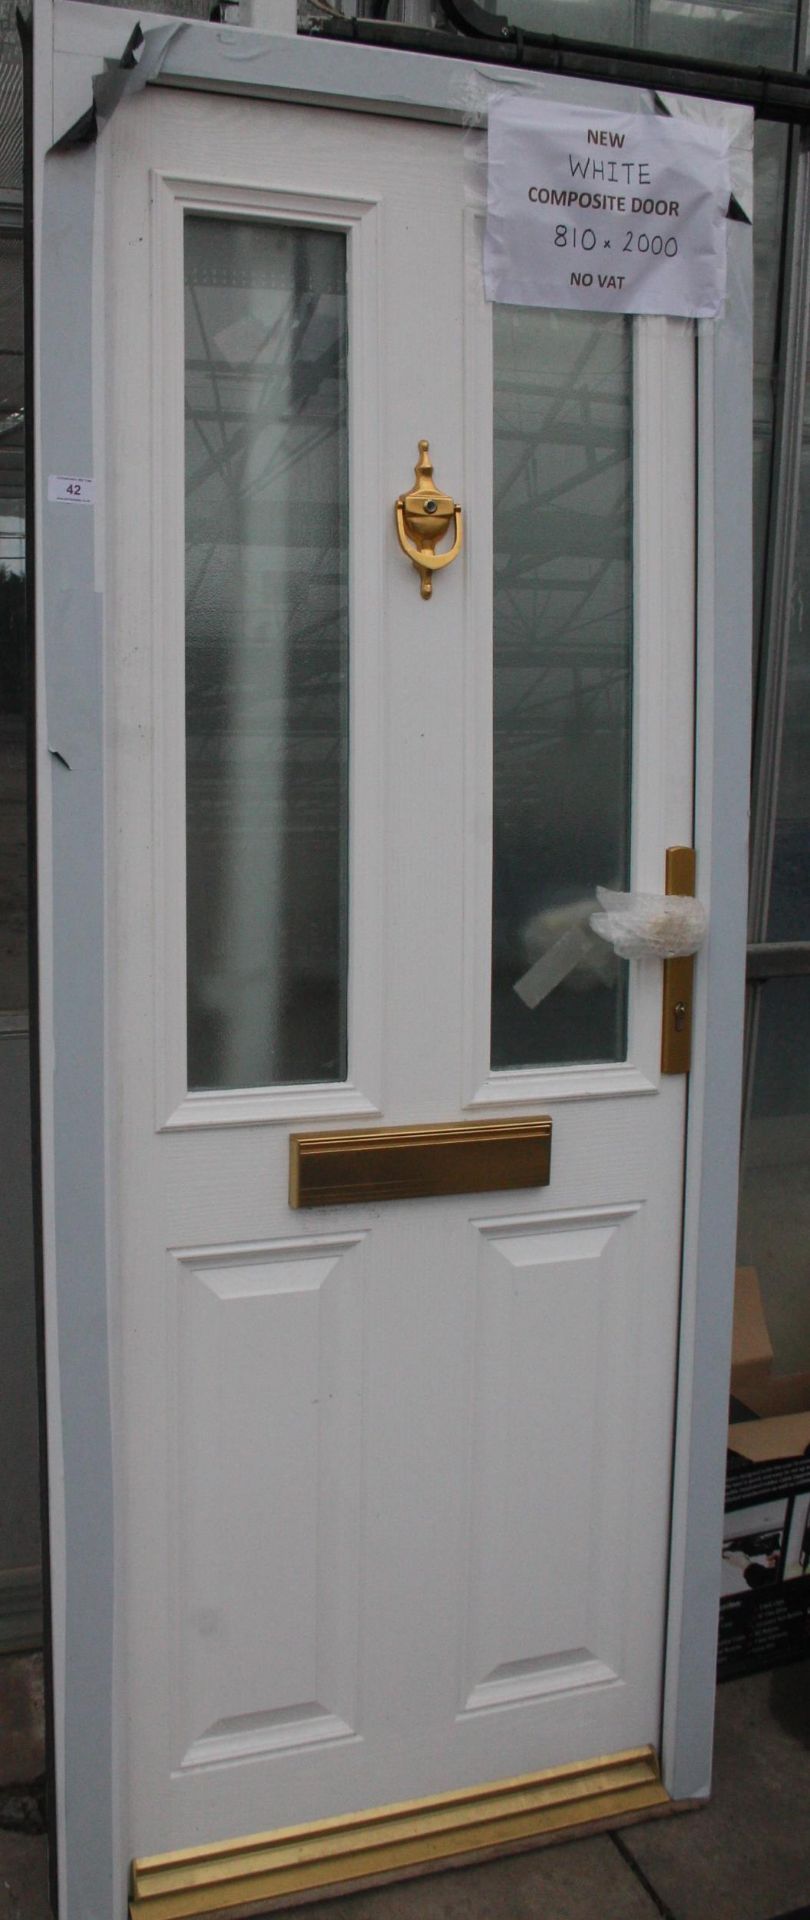 A NEW WHITE COMPOSITE DOOR AND FRAME 810MM X 2000MM LOCK AND KEYS IN LETTERBOX NO VAT